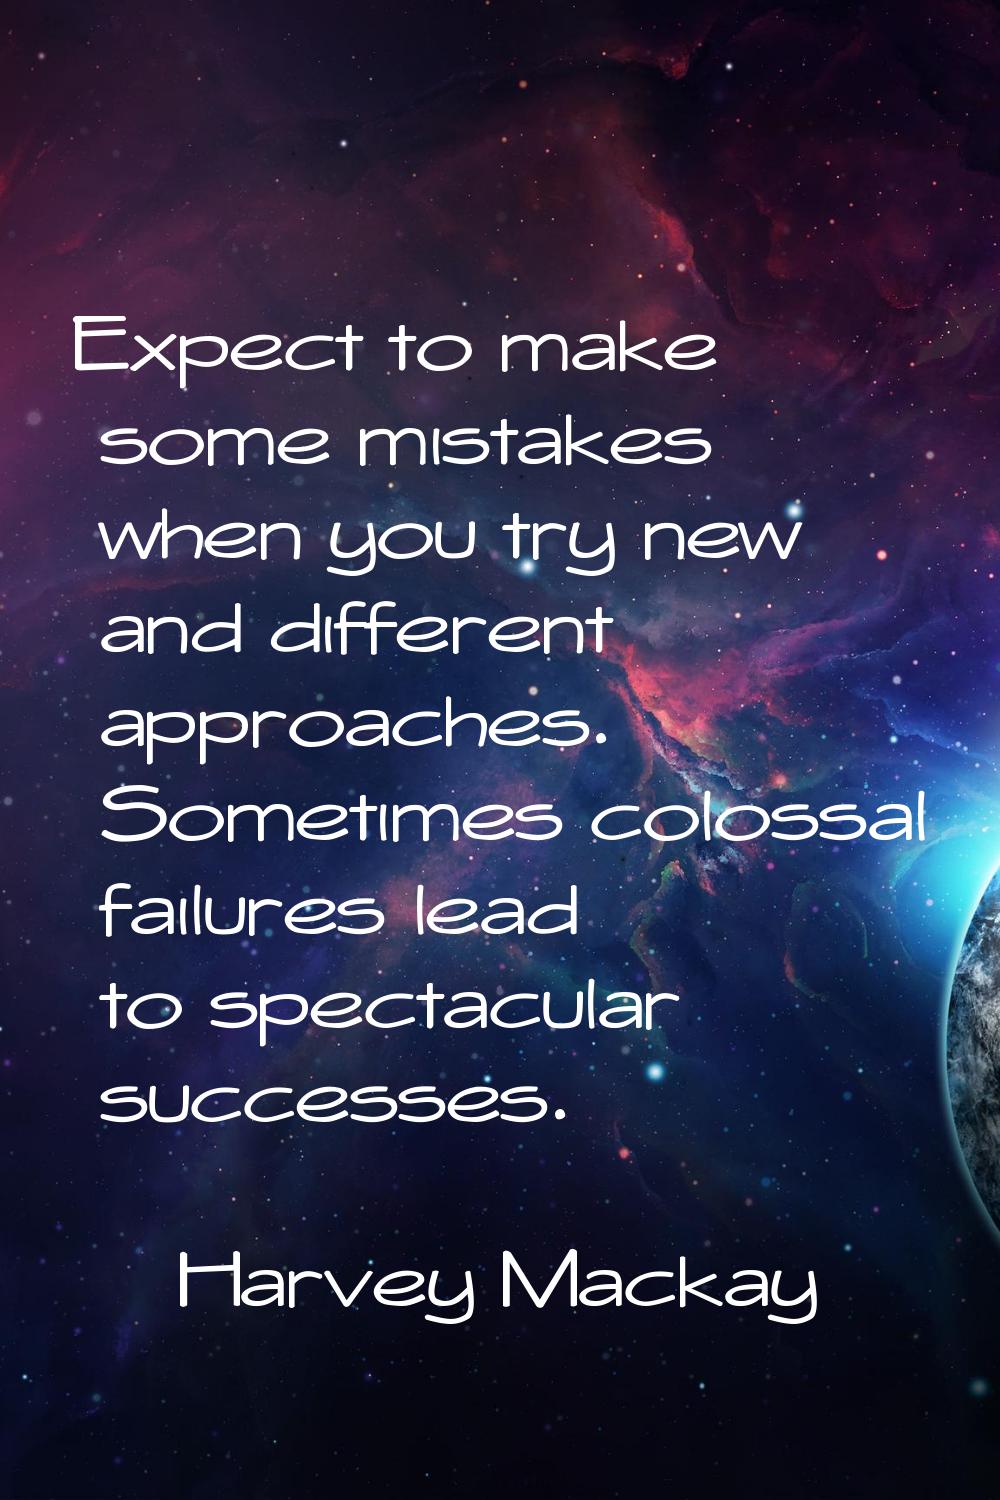 Expect to make some mistakes when you try new and different approaches. Sometimes colossal failures